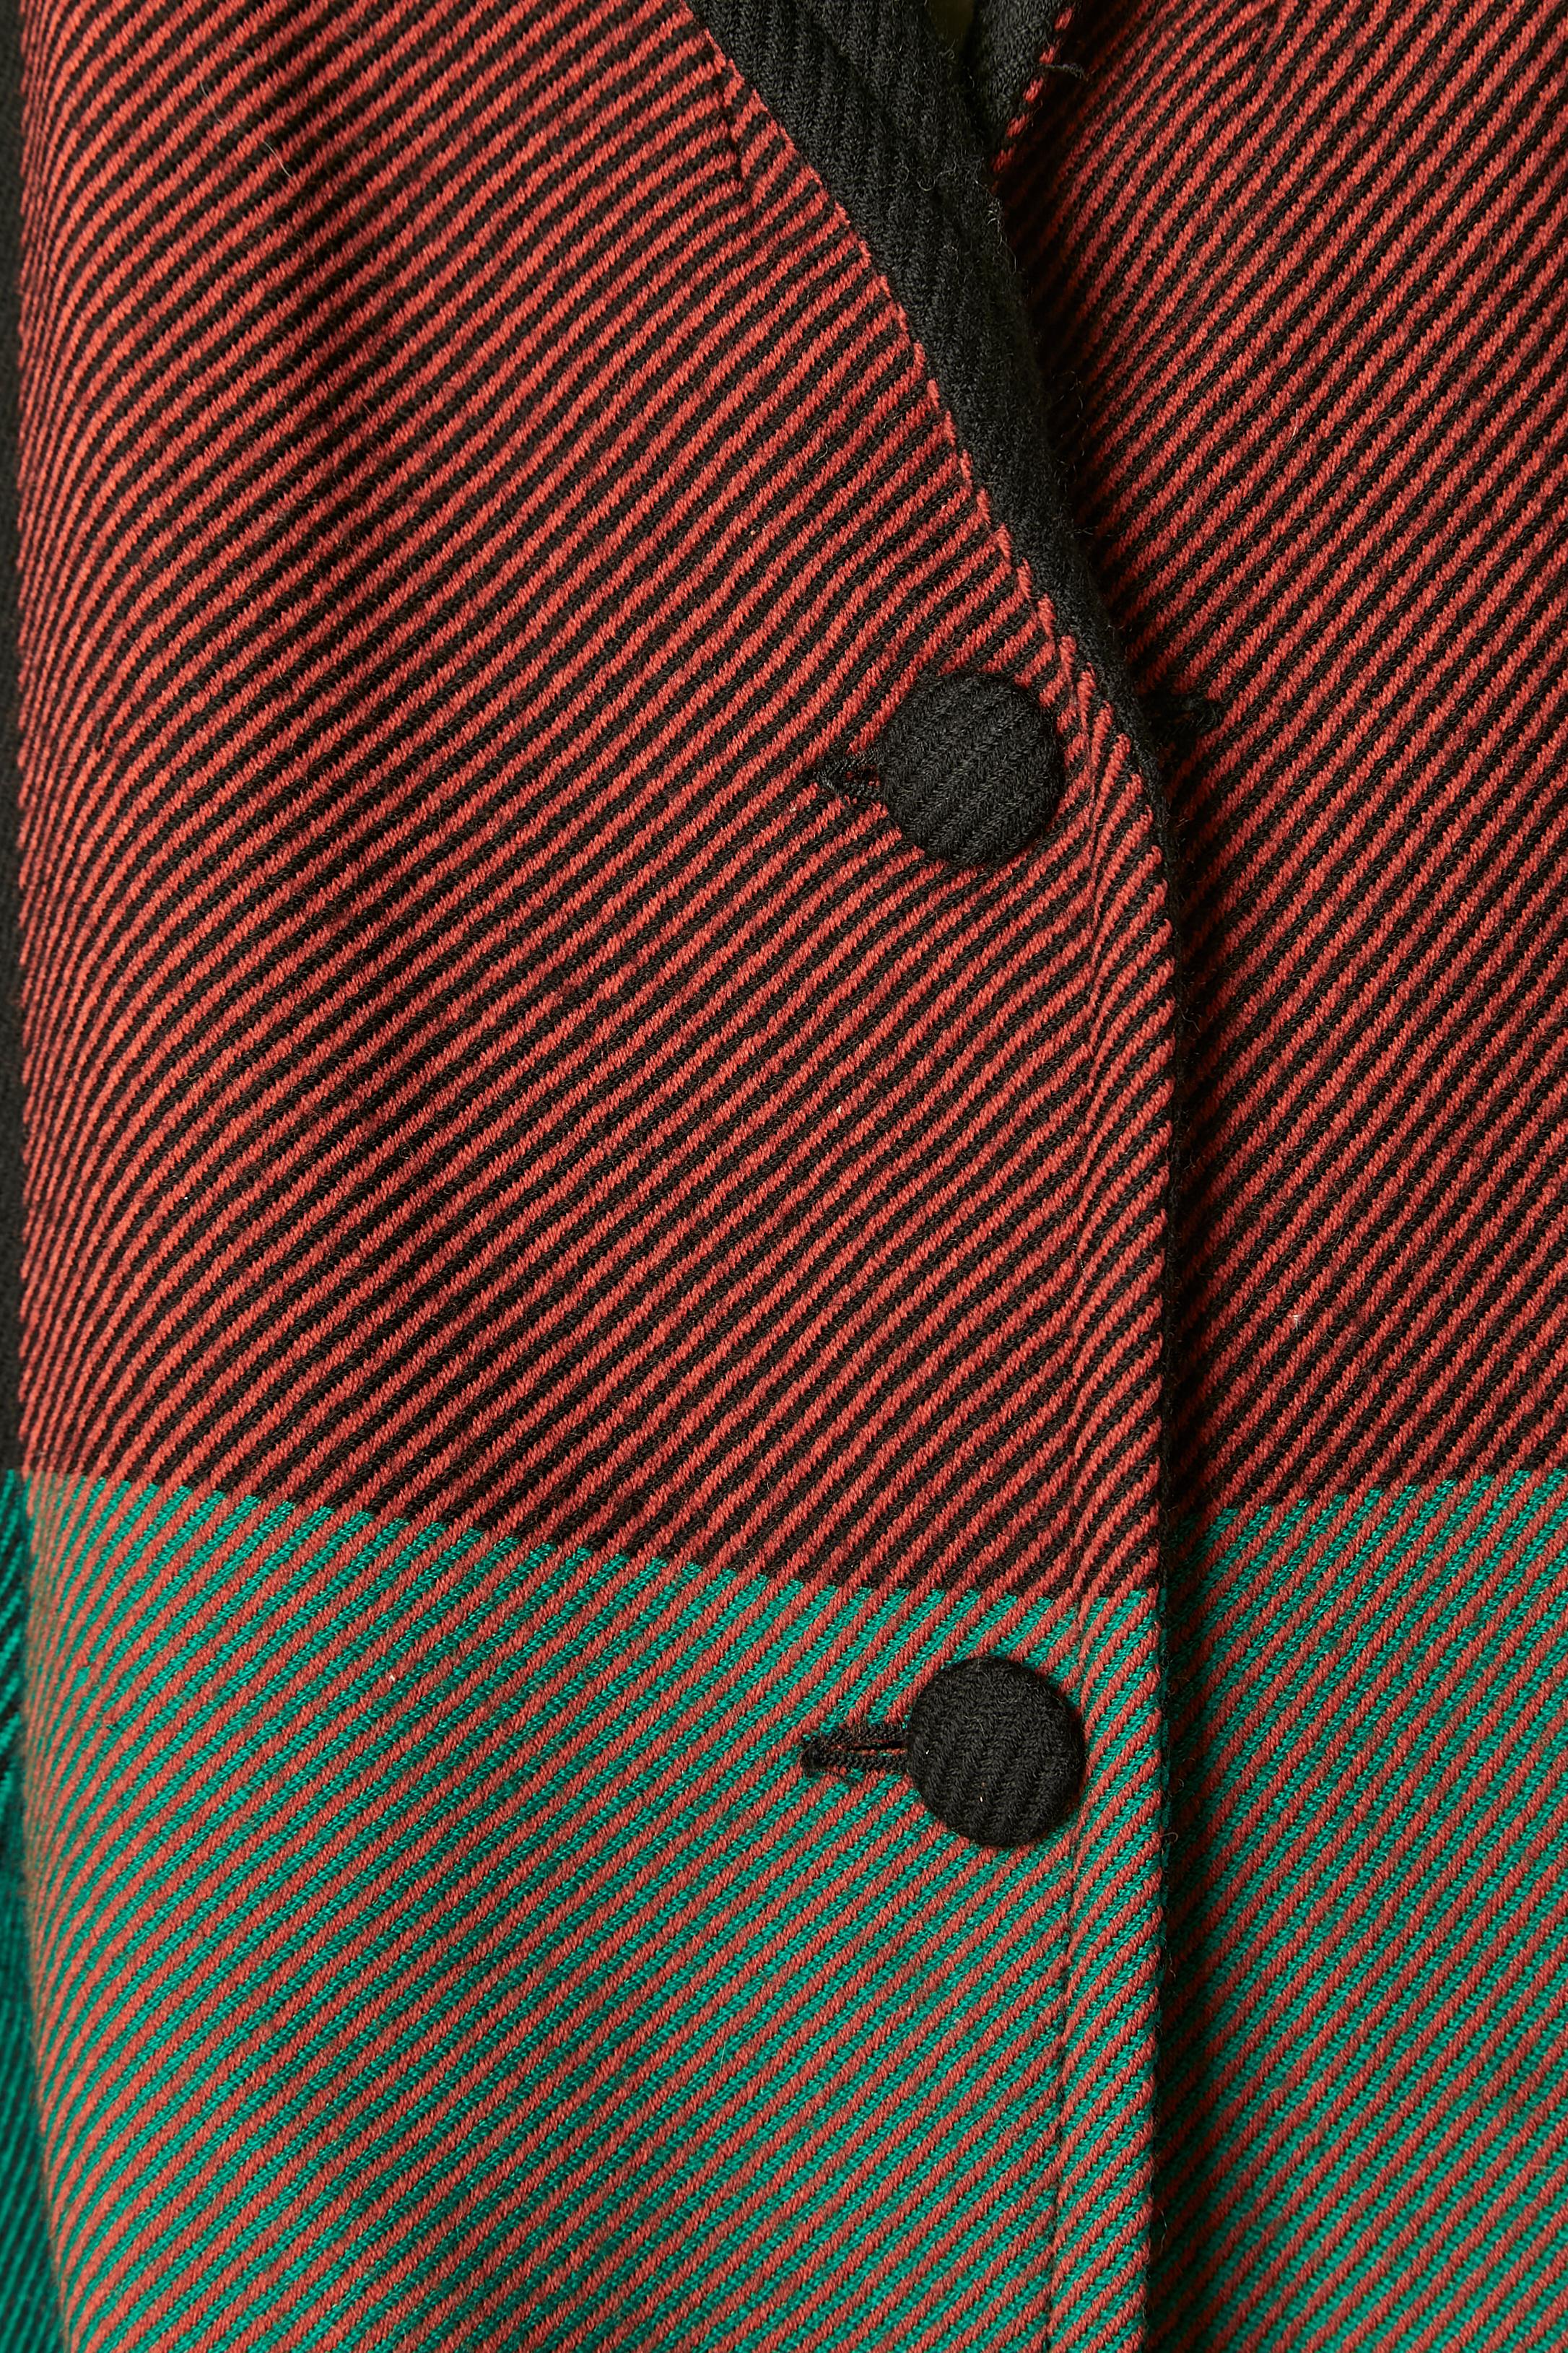 Multicolor check single-breasted jacket with green satin lining. 
Shoulder-pads. 
Popy Moreni is an Italian designer working in Paris who has managed to combine distinctive style elements from both countries— a strong Italian sense of color and